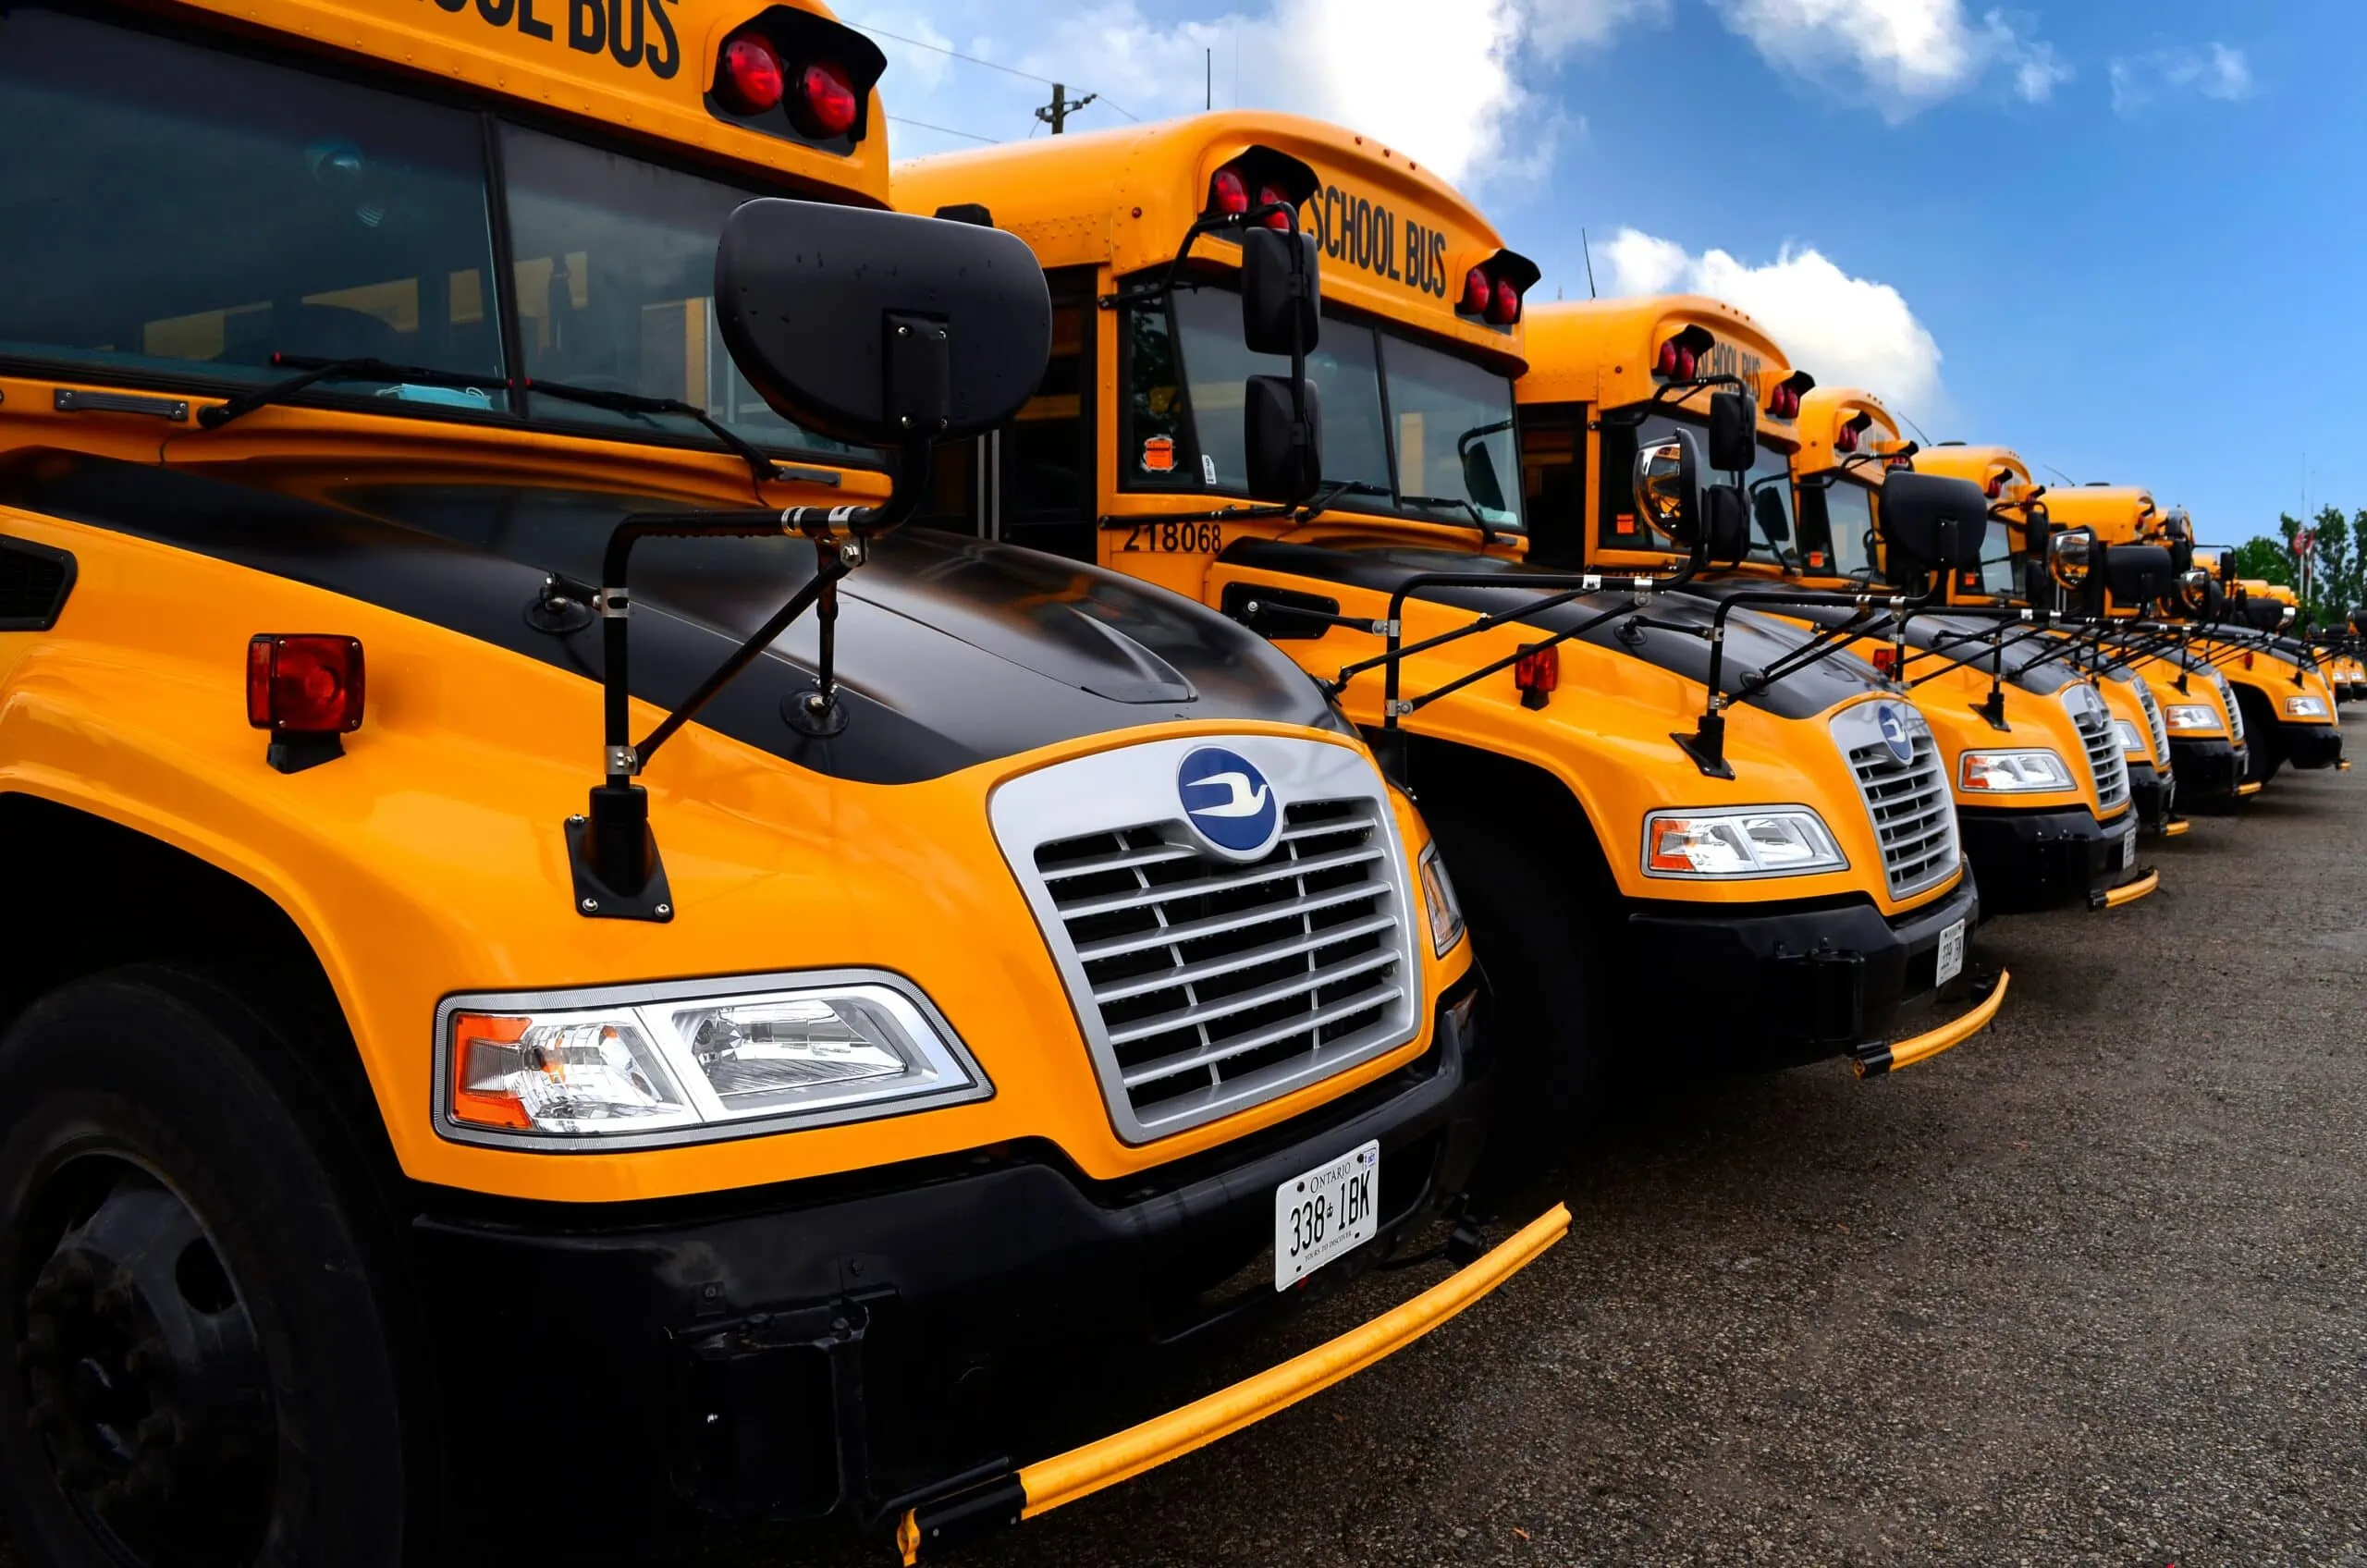 Row of school buses in a lot all equipped with a GPS tracking system